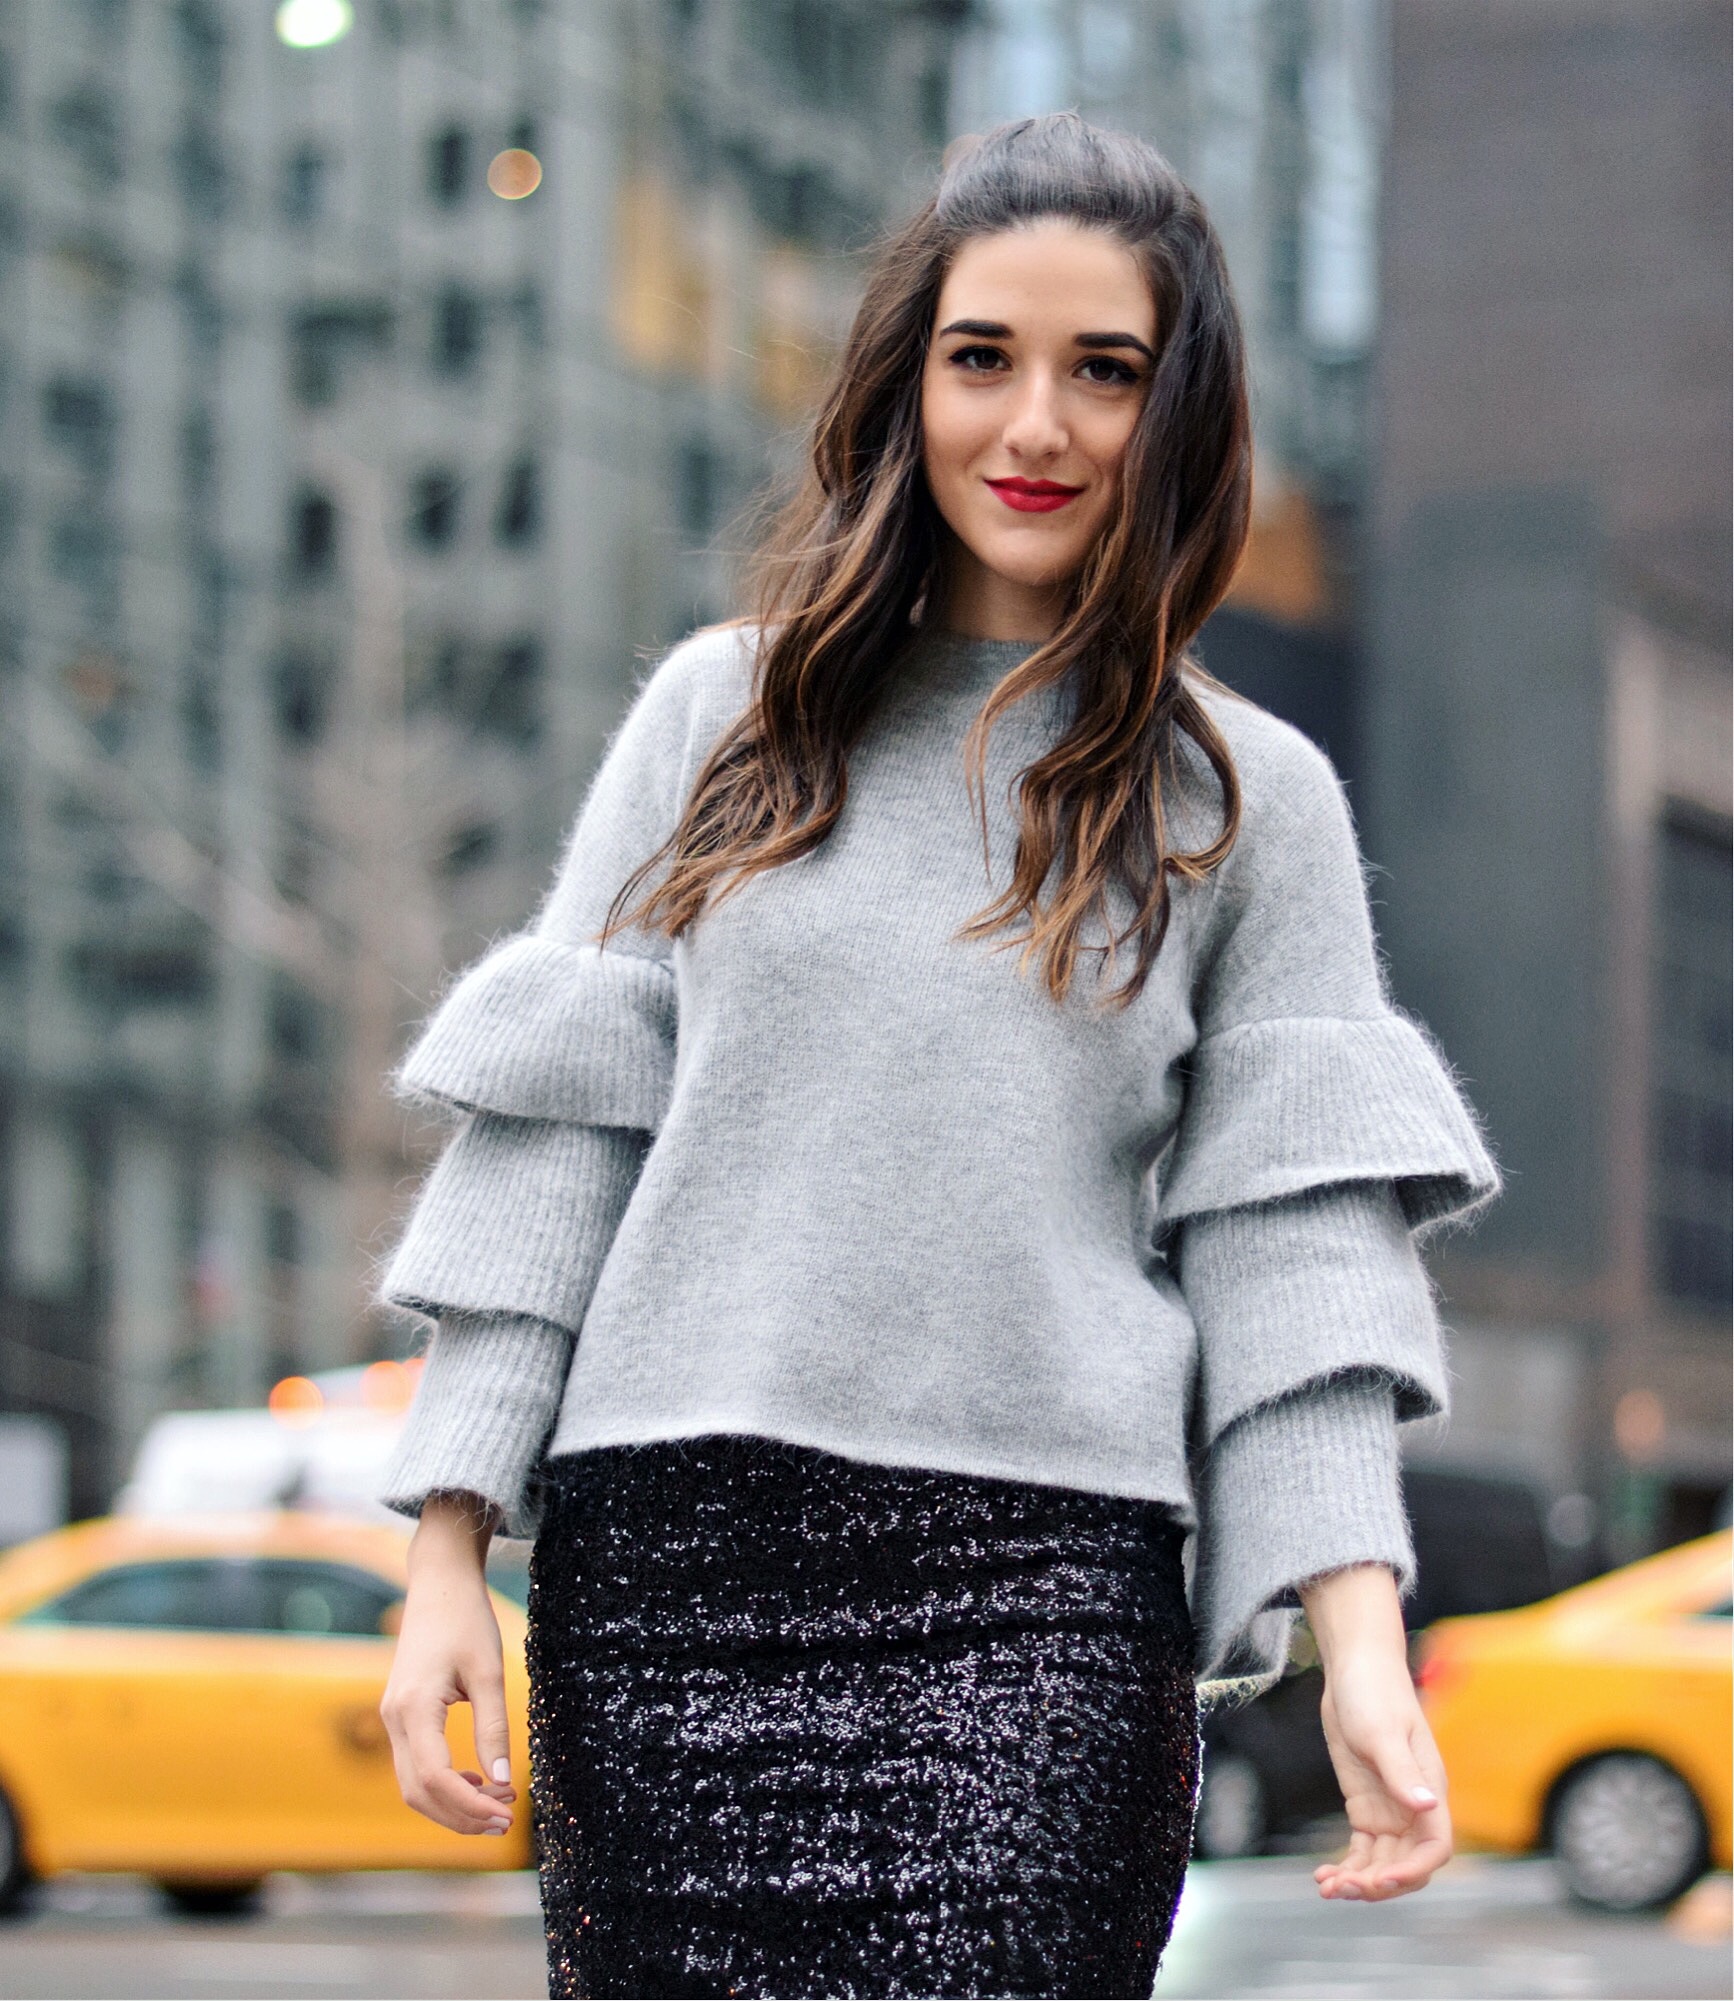 Grey Ruffle Sleeve Sweater Shop Trescool Fall Winter Esther Santer Fashion Blog Louboutins & Love NYC Street Style Blogger Outfit OOTD Trendy Hair Girl Women Trendy Online Shopping What To Wear Stylish Fashionista Beauty Photoshoot Women Sequin Skirt.JPG